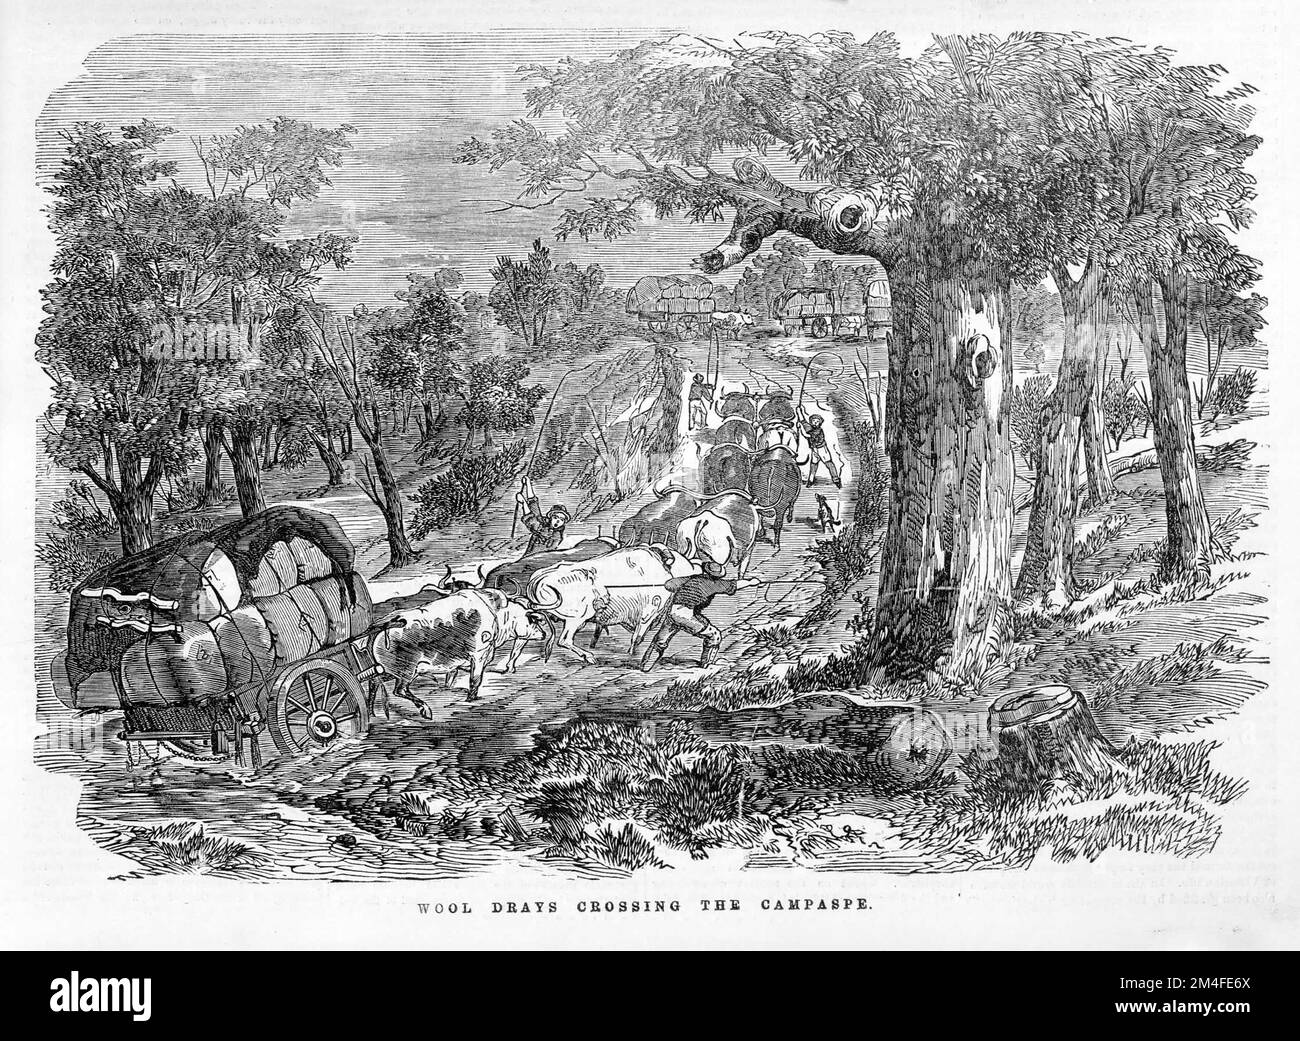 Wool Drays Crossing The Campaspe in 1864. Stock Photo